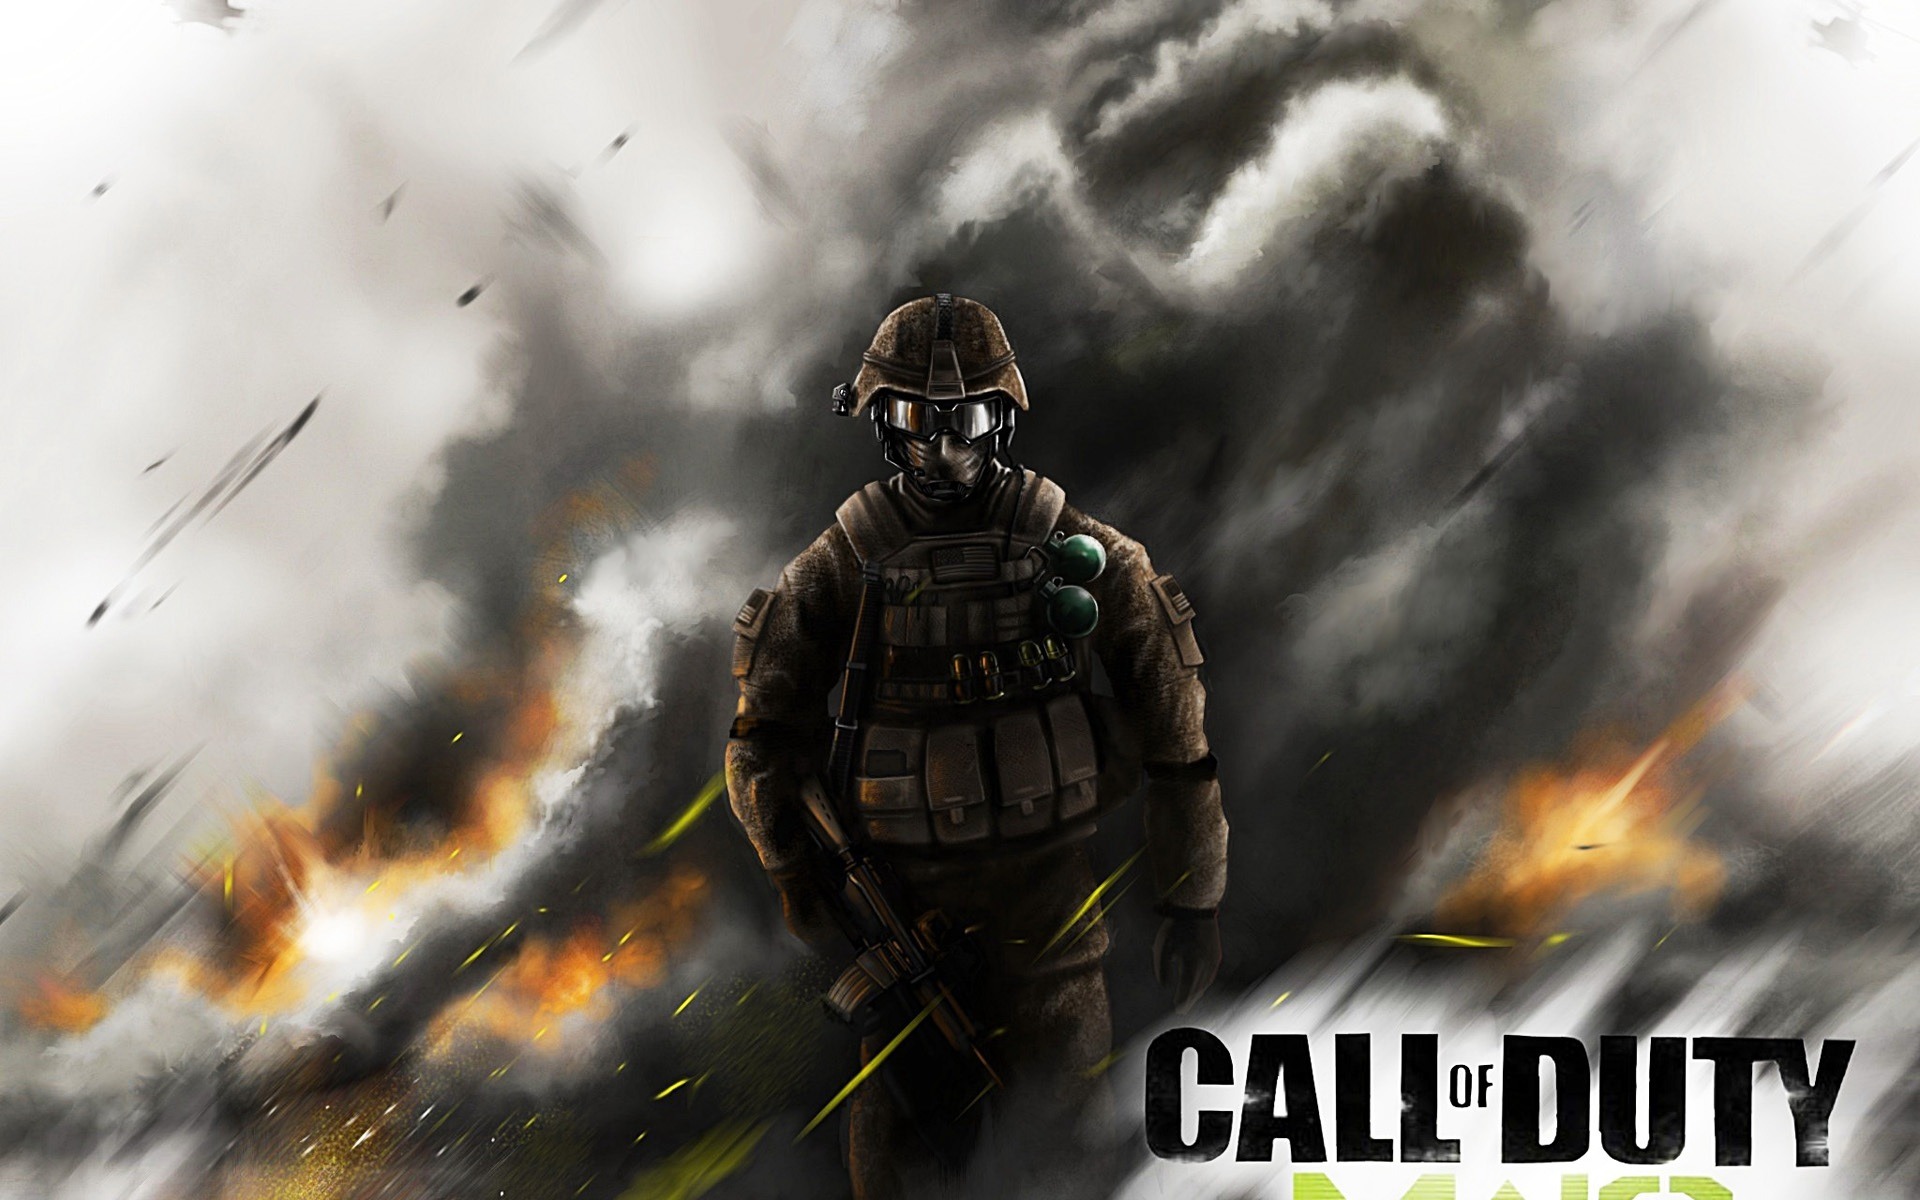 Call of Duty: MW3 HD wallpapers #15 - 1920x1200